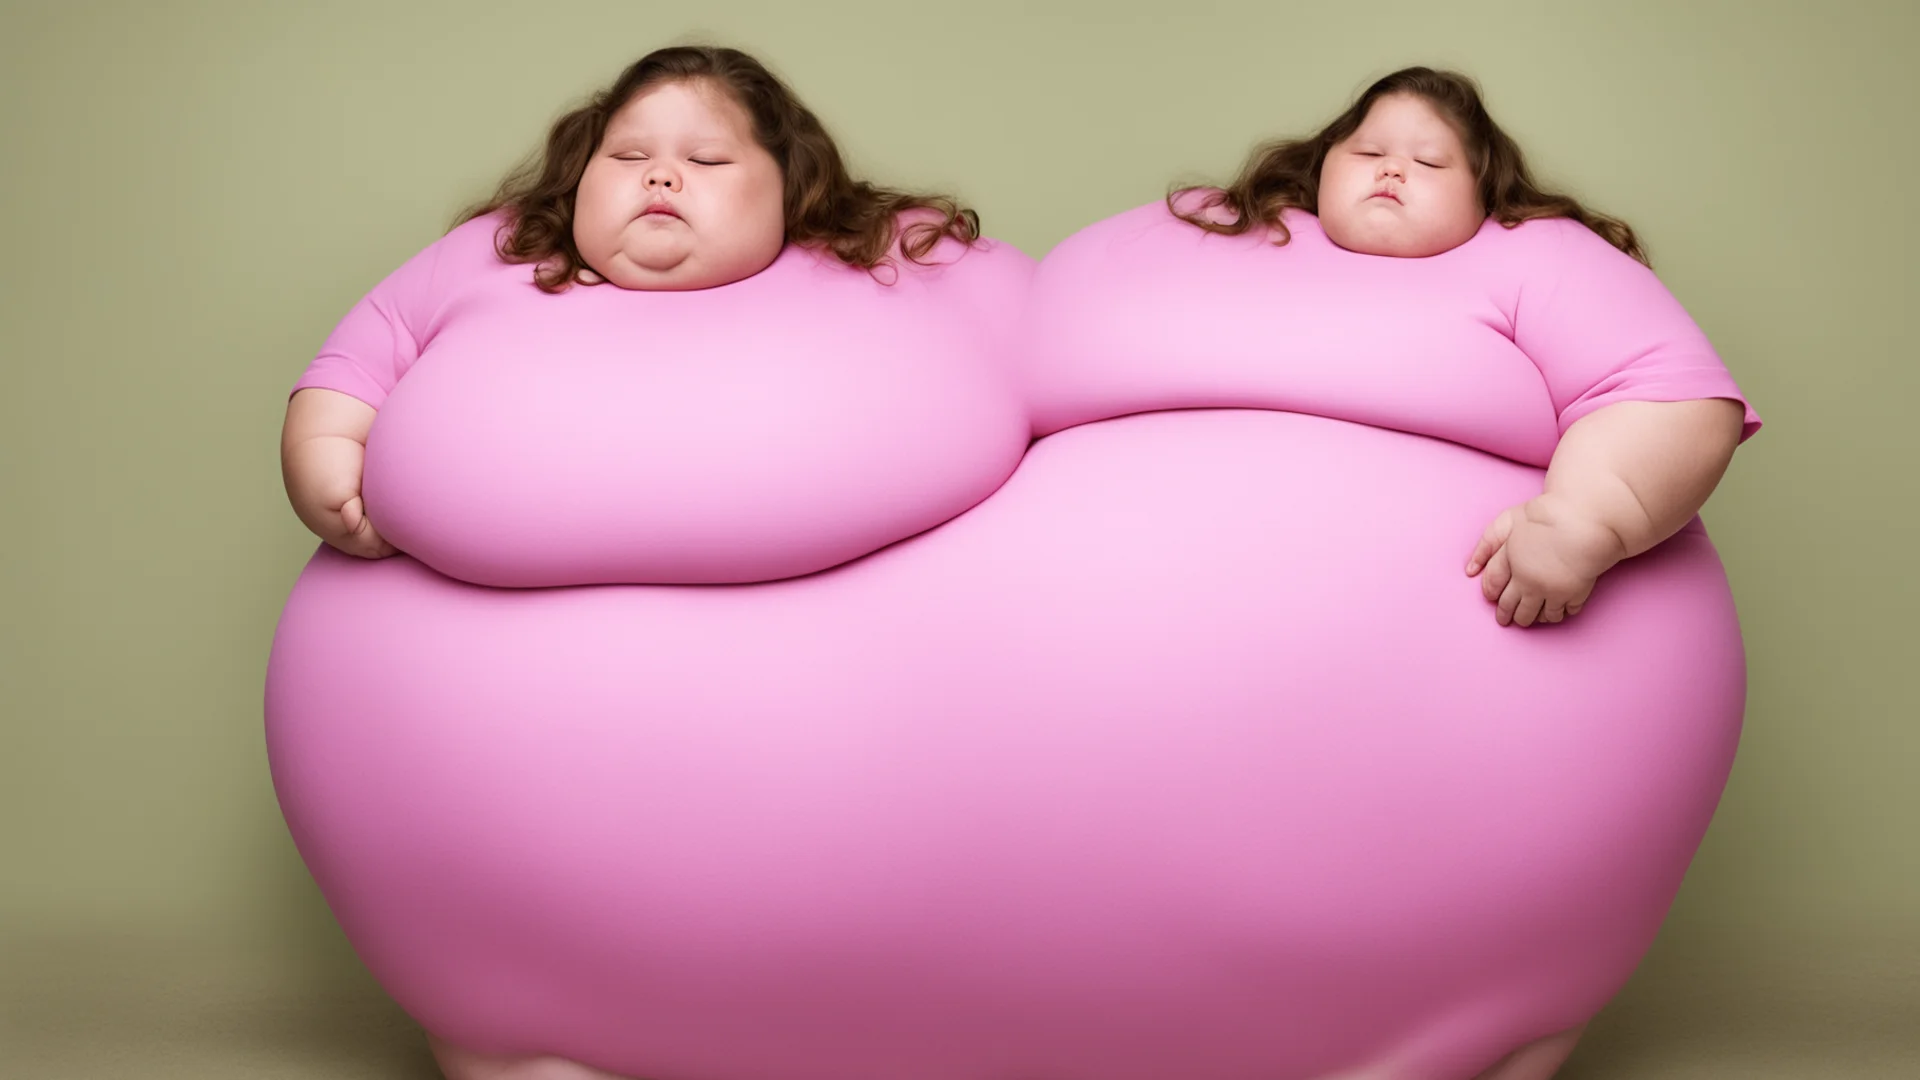 aiultra morbidly obese young girl good looking trending fantastic 1 wide